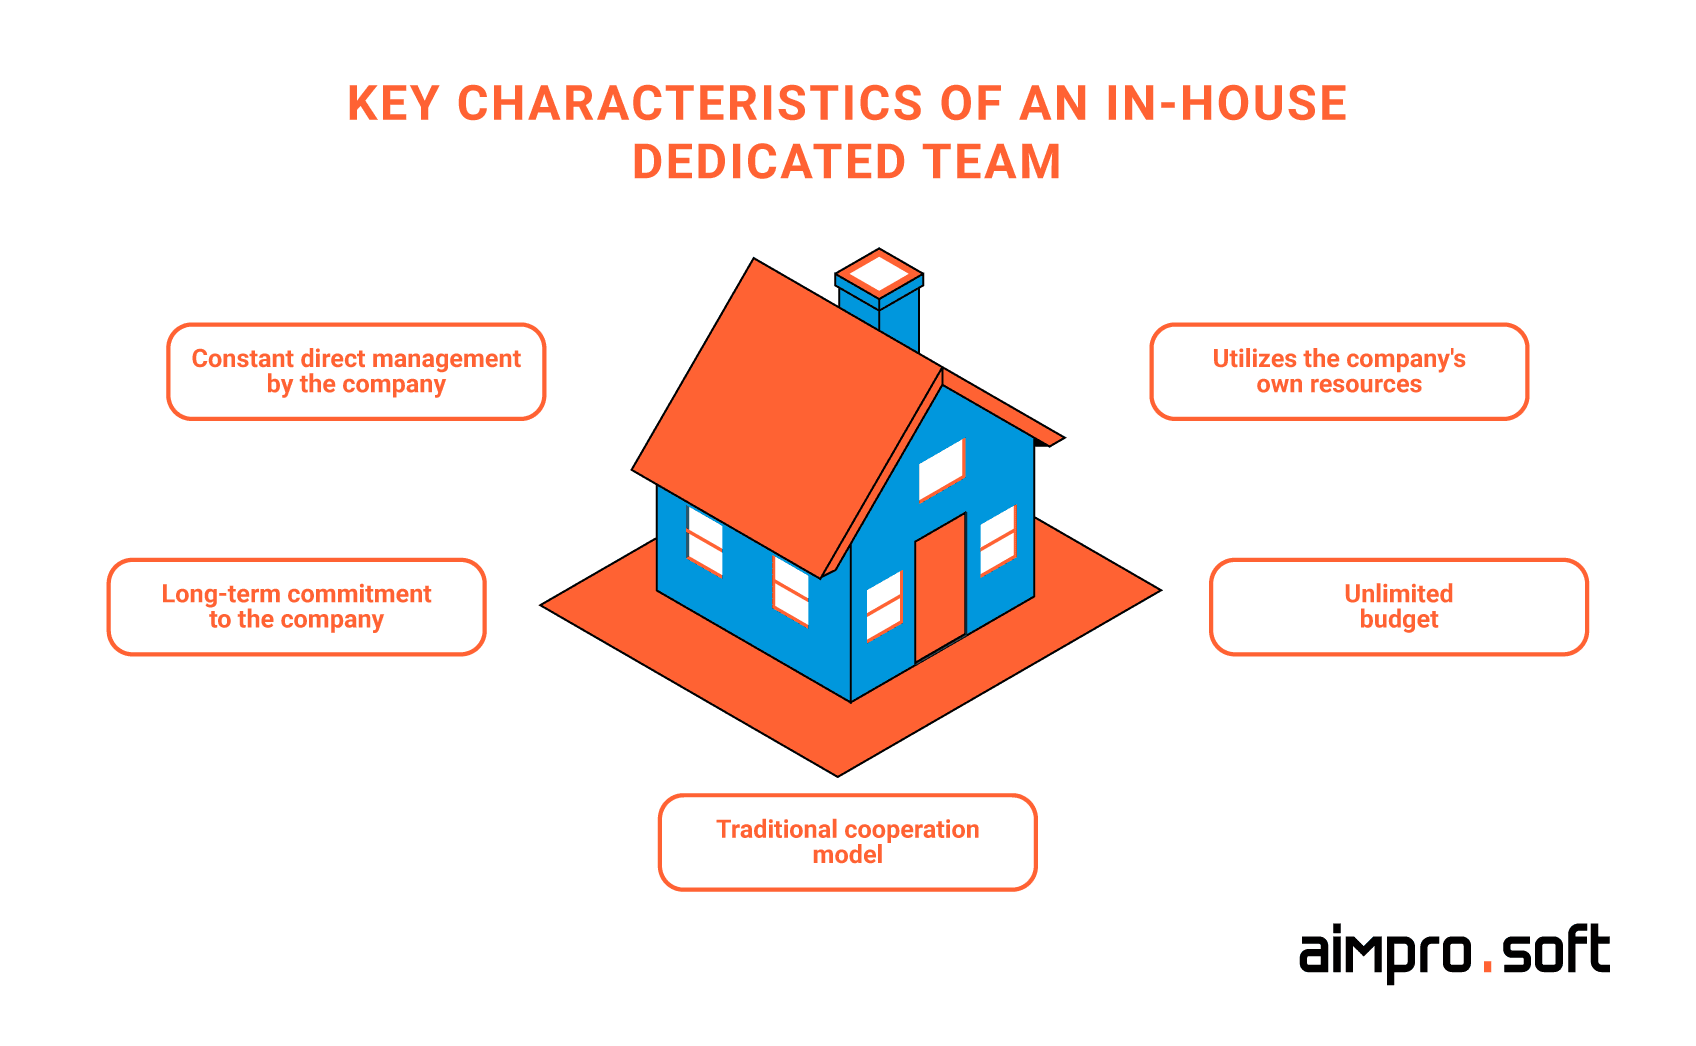 The main characteristics of a dedicated in-house team